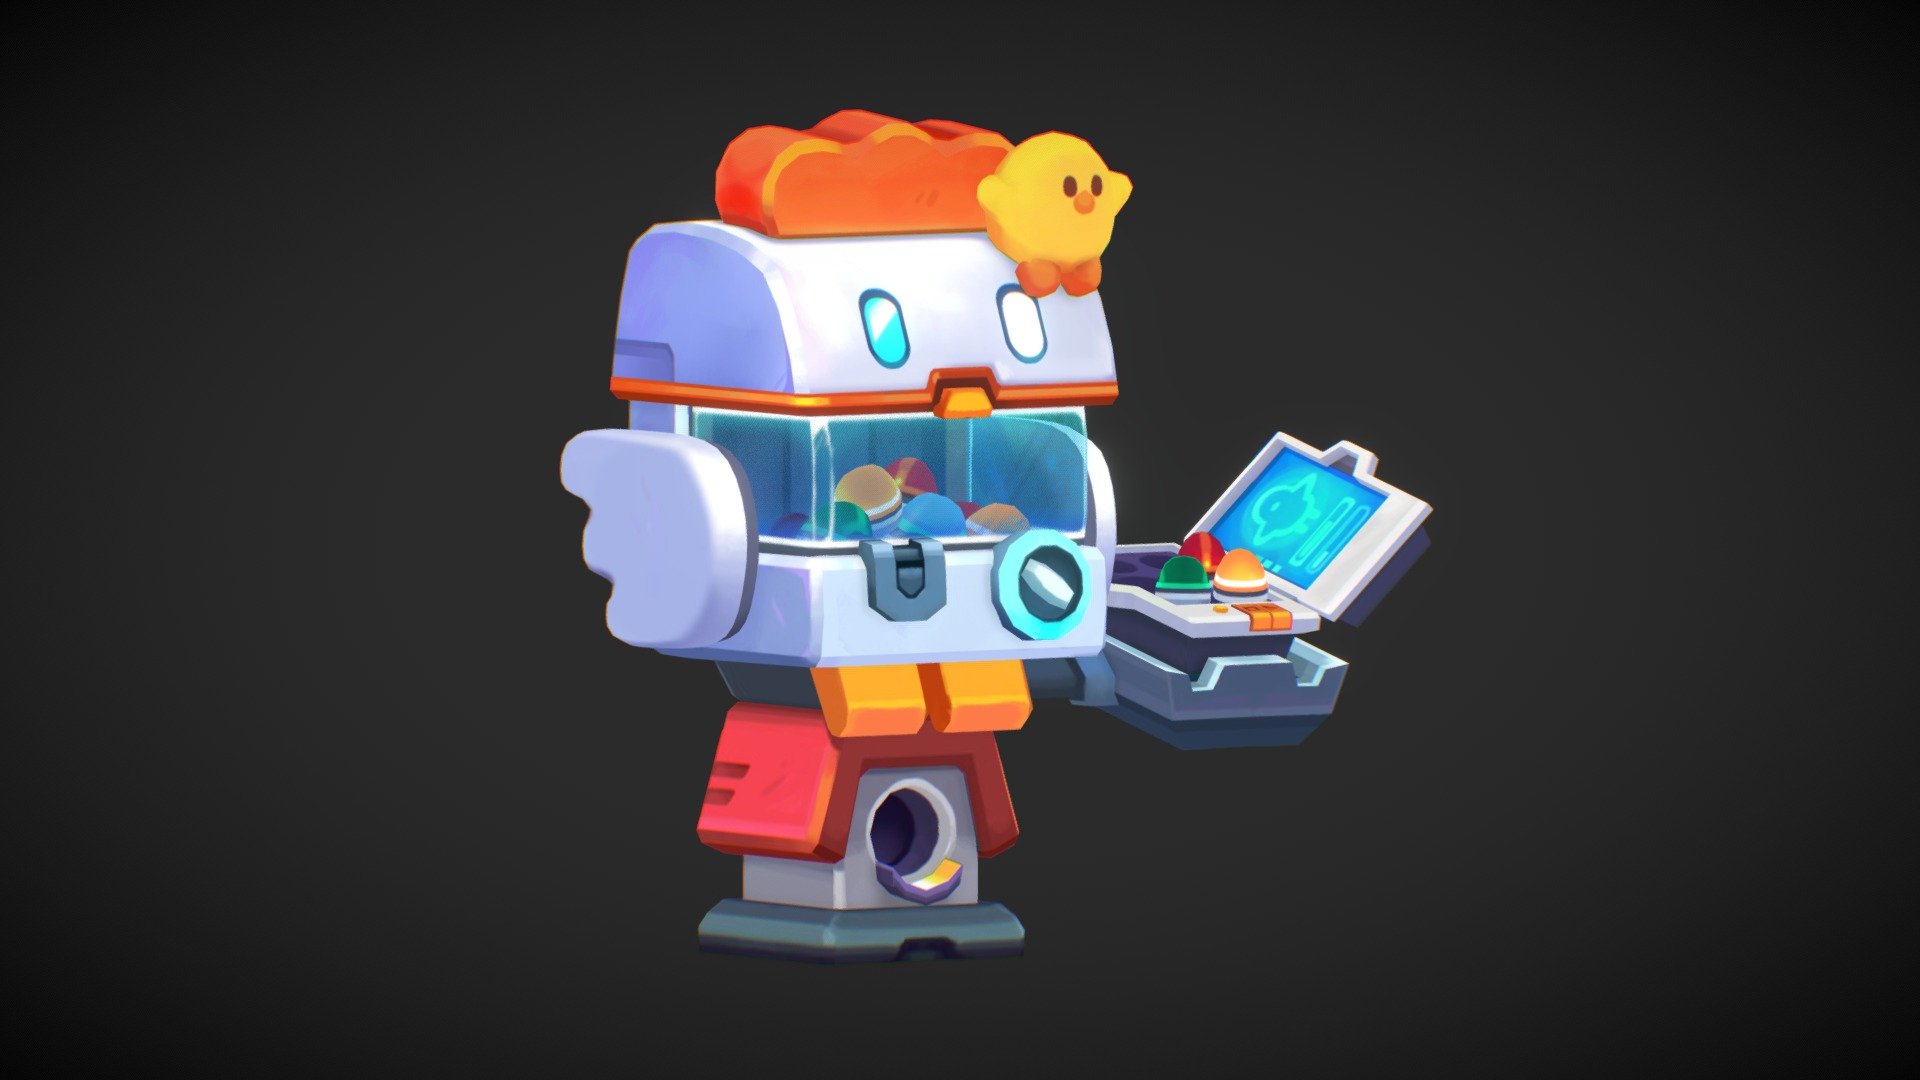 Created for the fourth week assignment of the CGMA Stylized Game Assets course. 

You send your robot units to attack another player's base. When a player wins a battle, they use their earned money to upgrade &amp; acquire new units from this gacha machine. They hold their eggs in an egg carton that also displays information on their collection! - Gachapon Egg Capsule Machine - 3D model by Justin Y (@justinwhy) 3d model